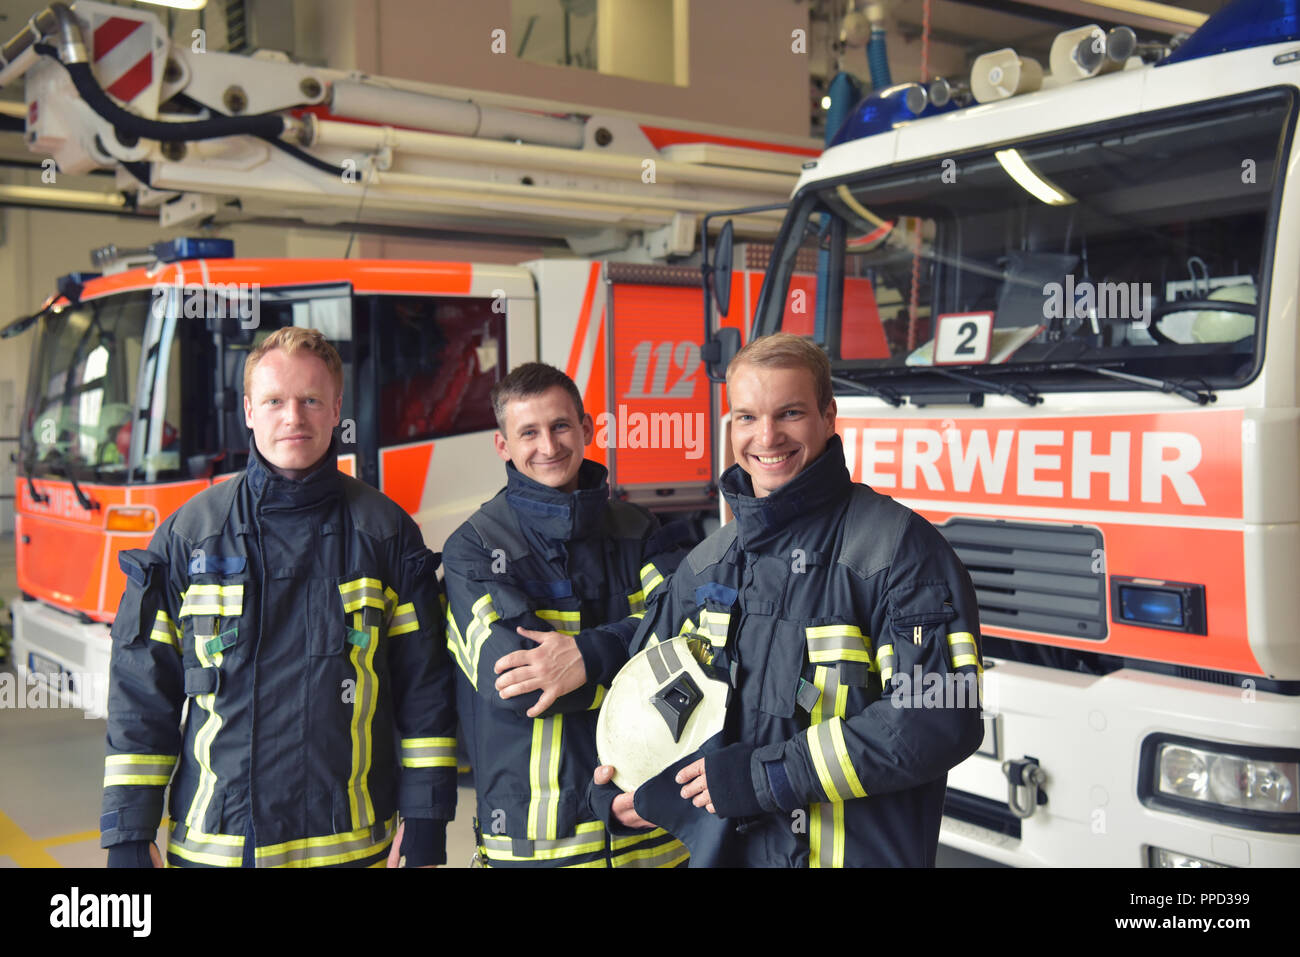 Group of firefighters at the emergency vehicle in the fire station Stock Photo